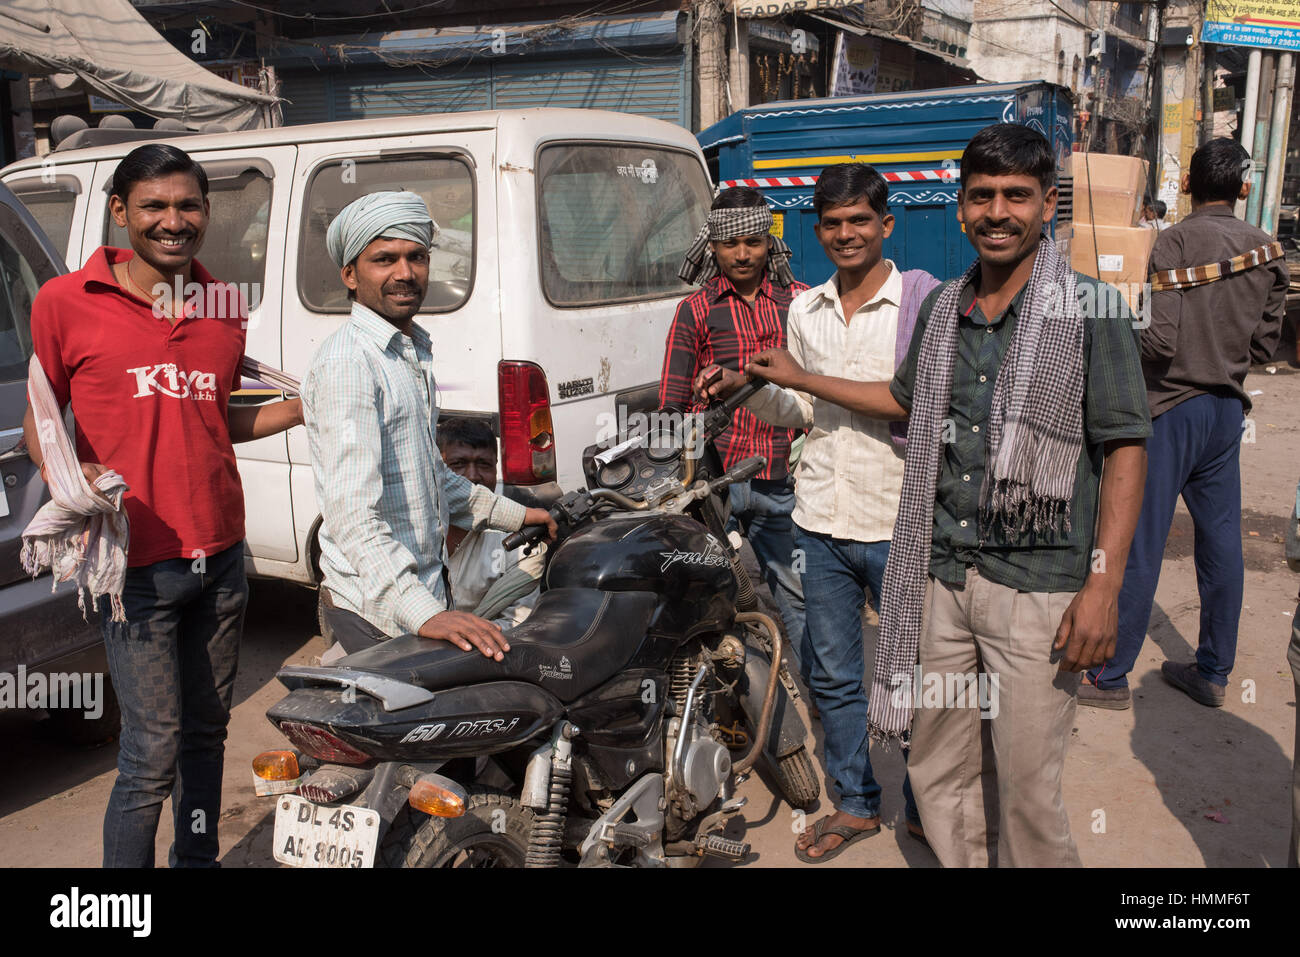 Five Indian men posing for a photograph Stock Photo